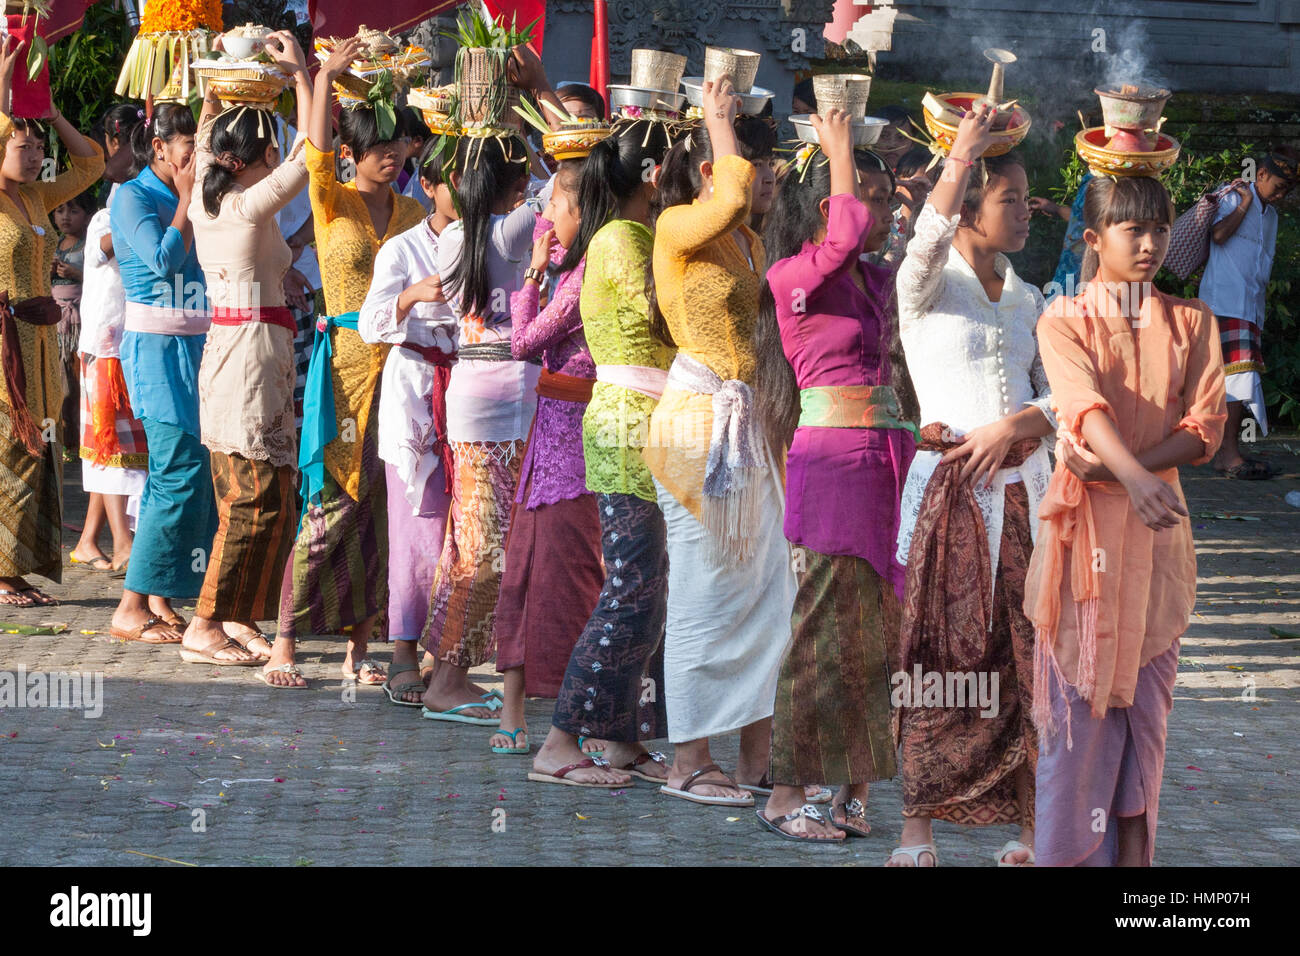 Young girls forming a procession of offerings at the Galungan festival in Bali, Indonesia Stock Photo